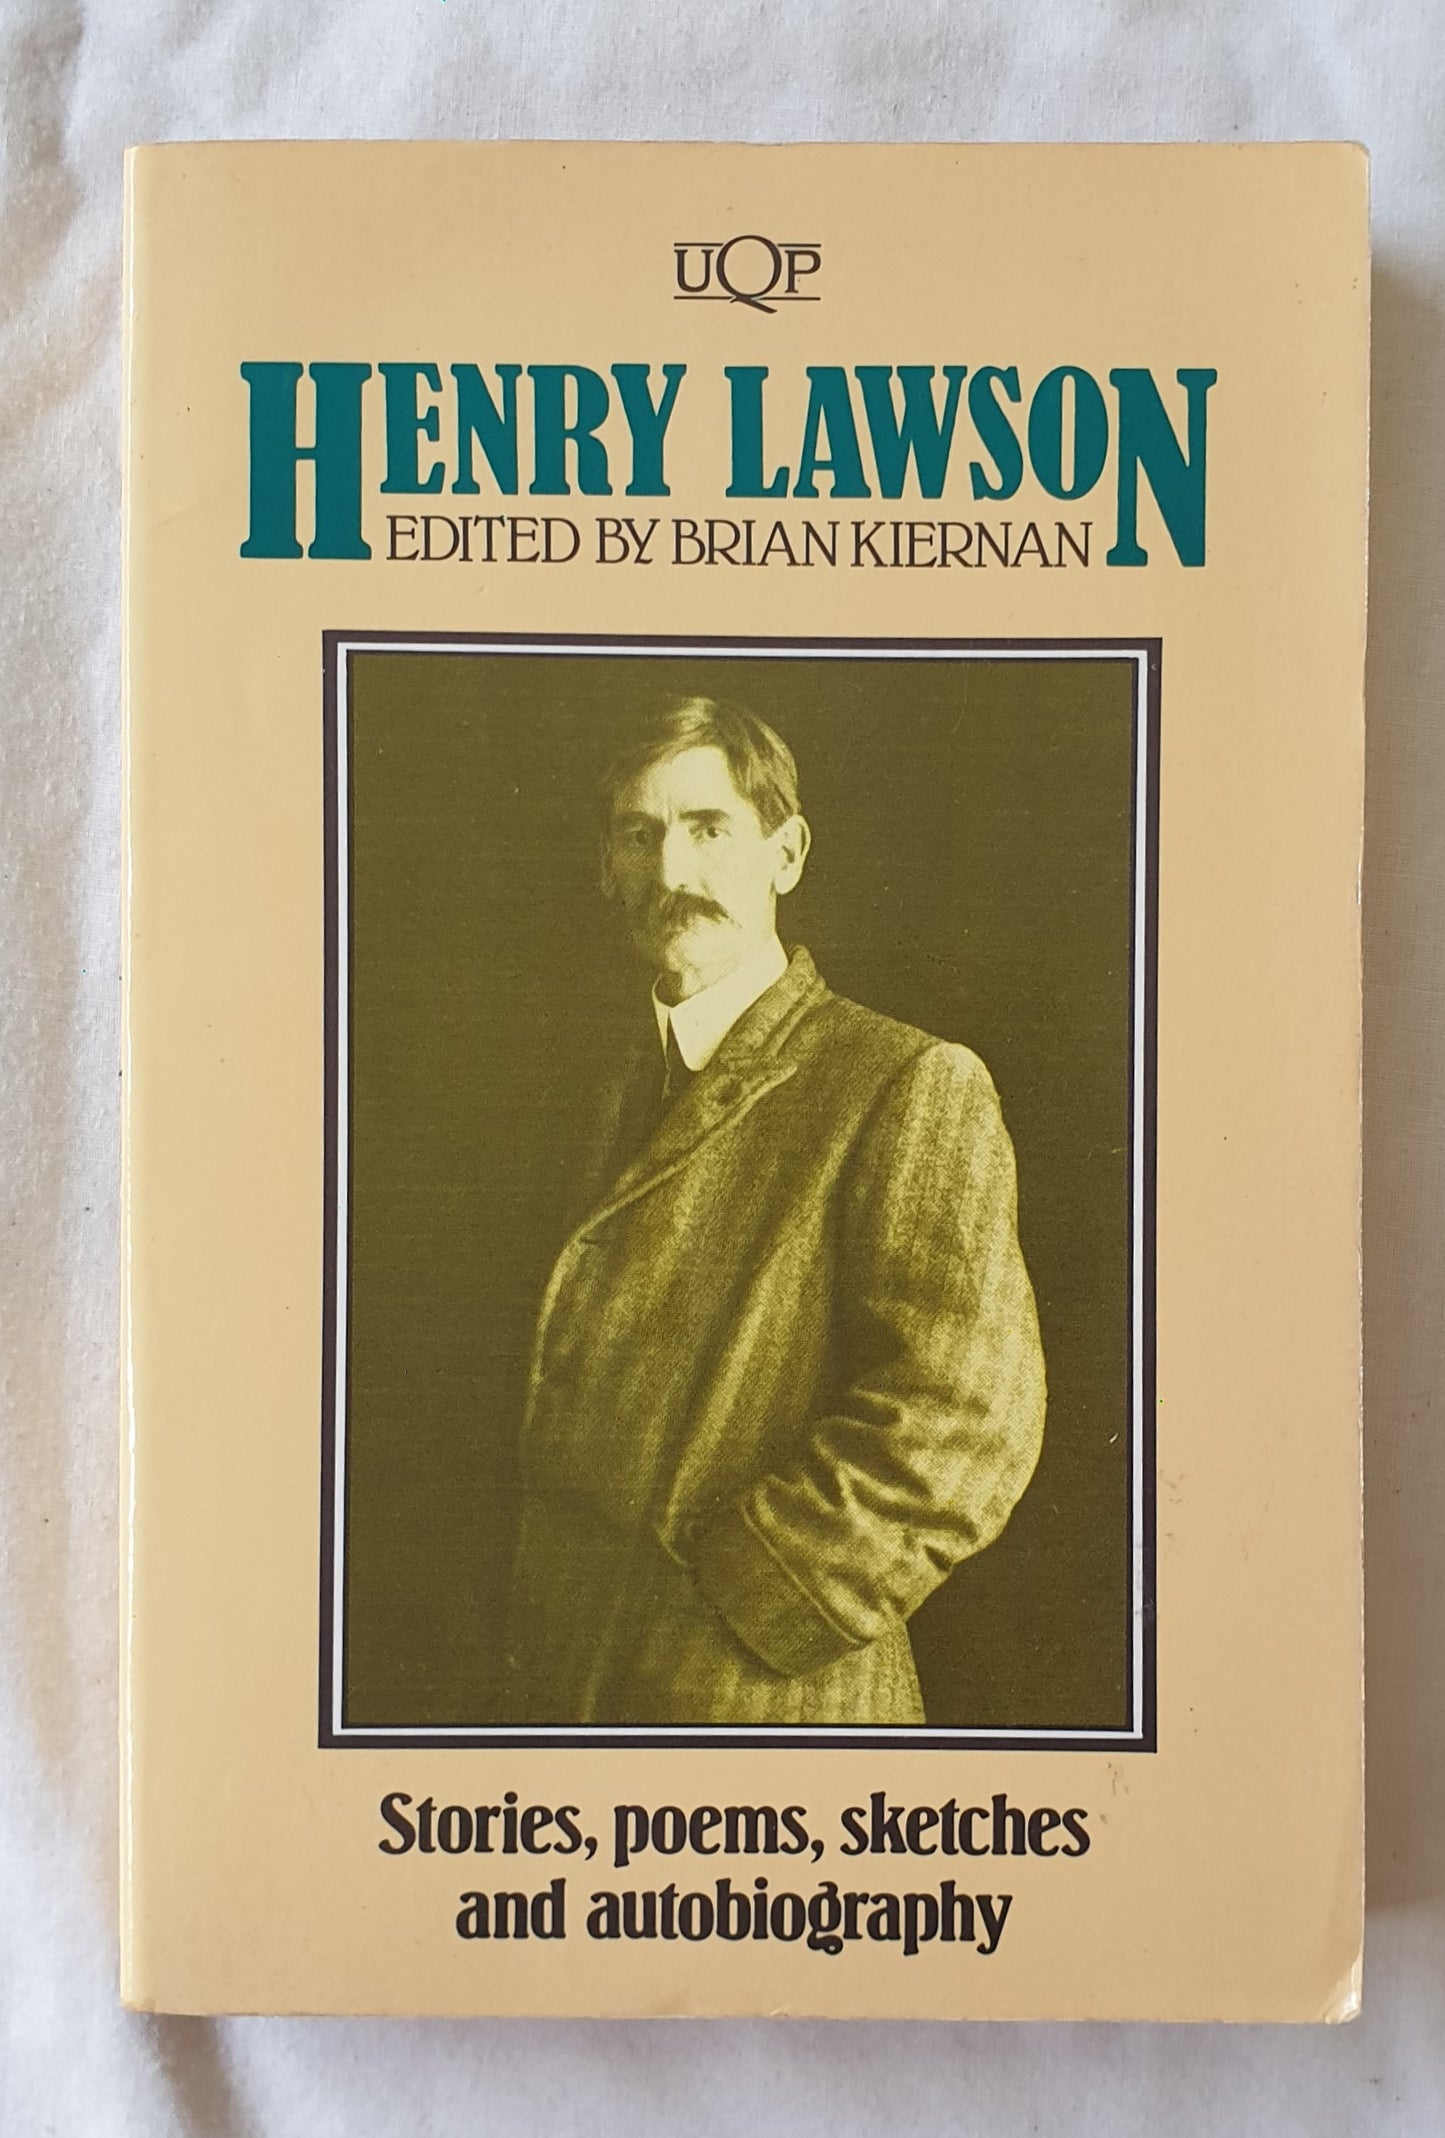 Henry Lawson  Stories, poems, sketches and autobiography  Edited by Brian Kiernan